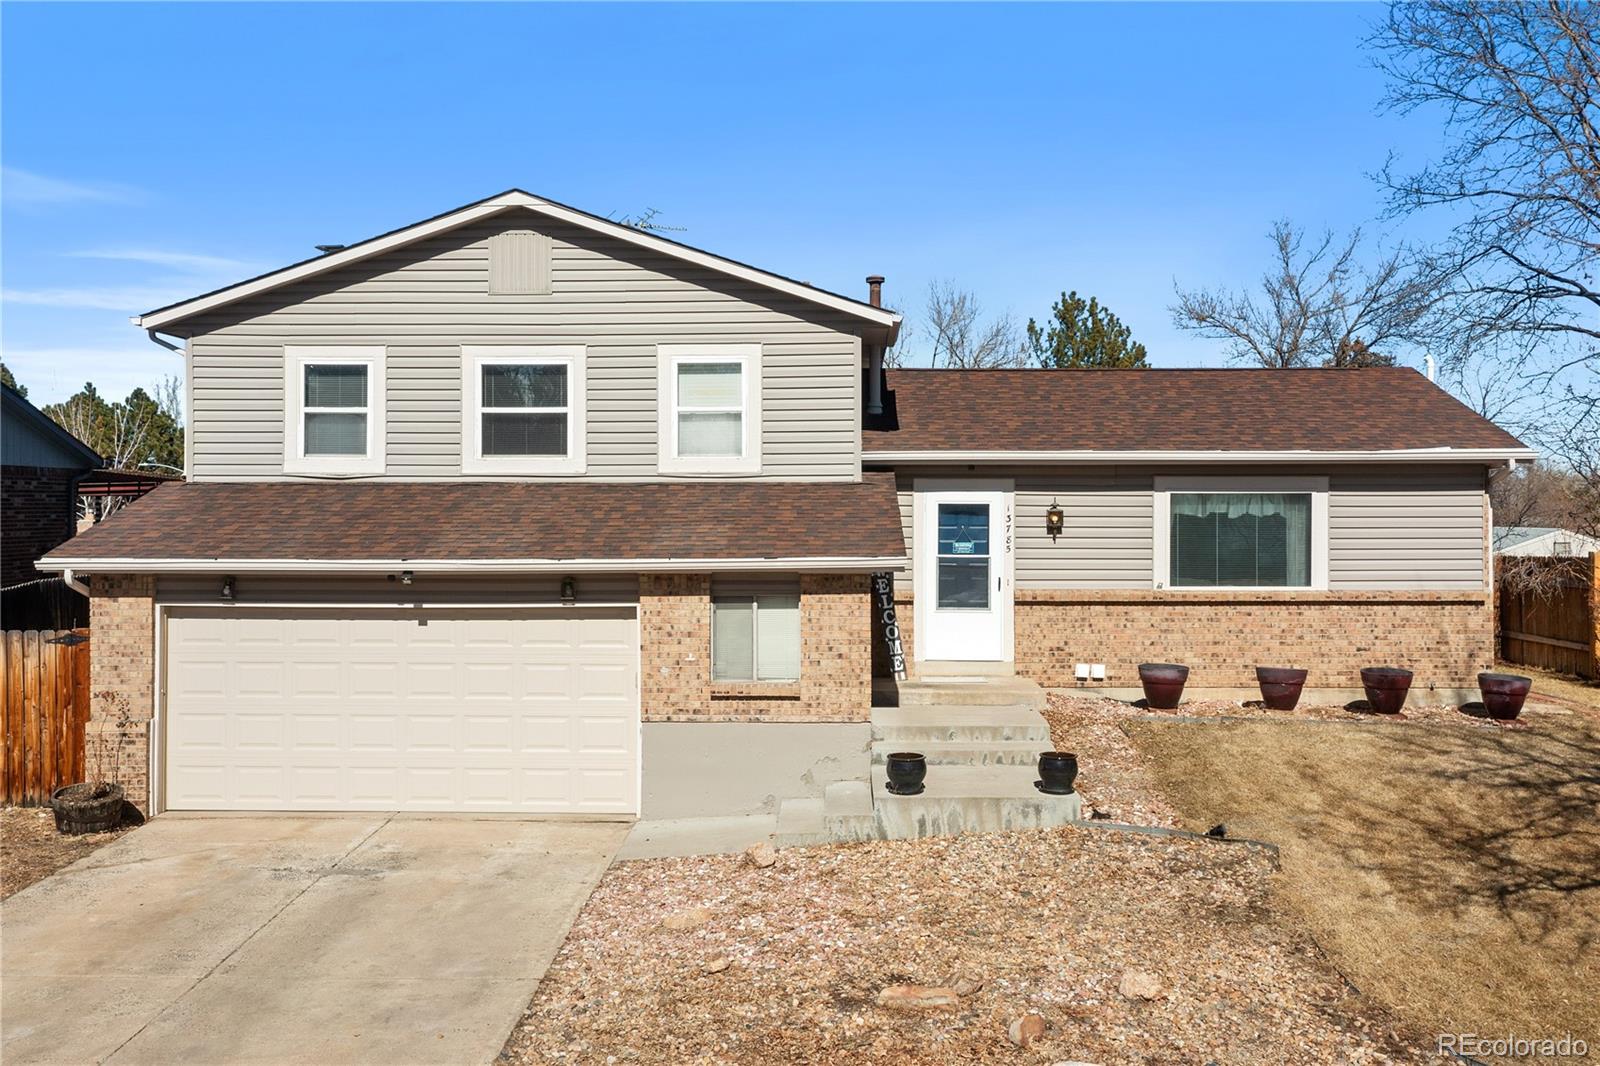 13785 W 67th Place, arvada MLS: 8545382 Beds: 4 Baths: 3 Price: $640,000